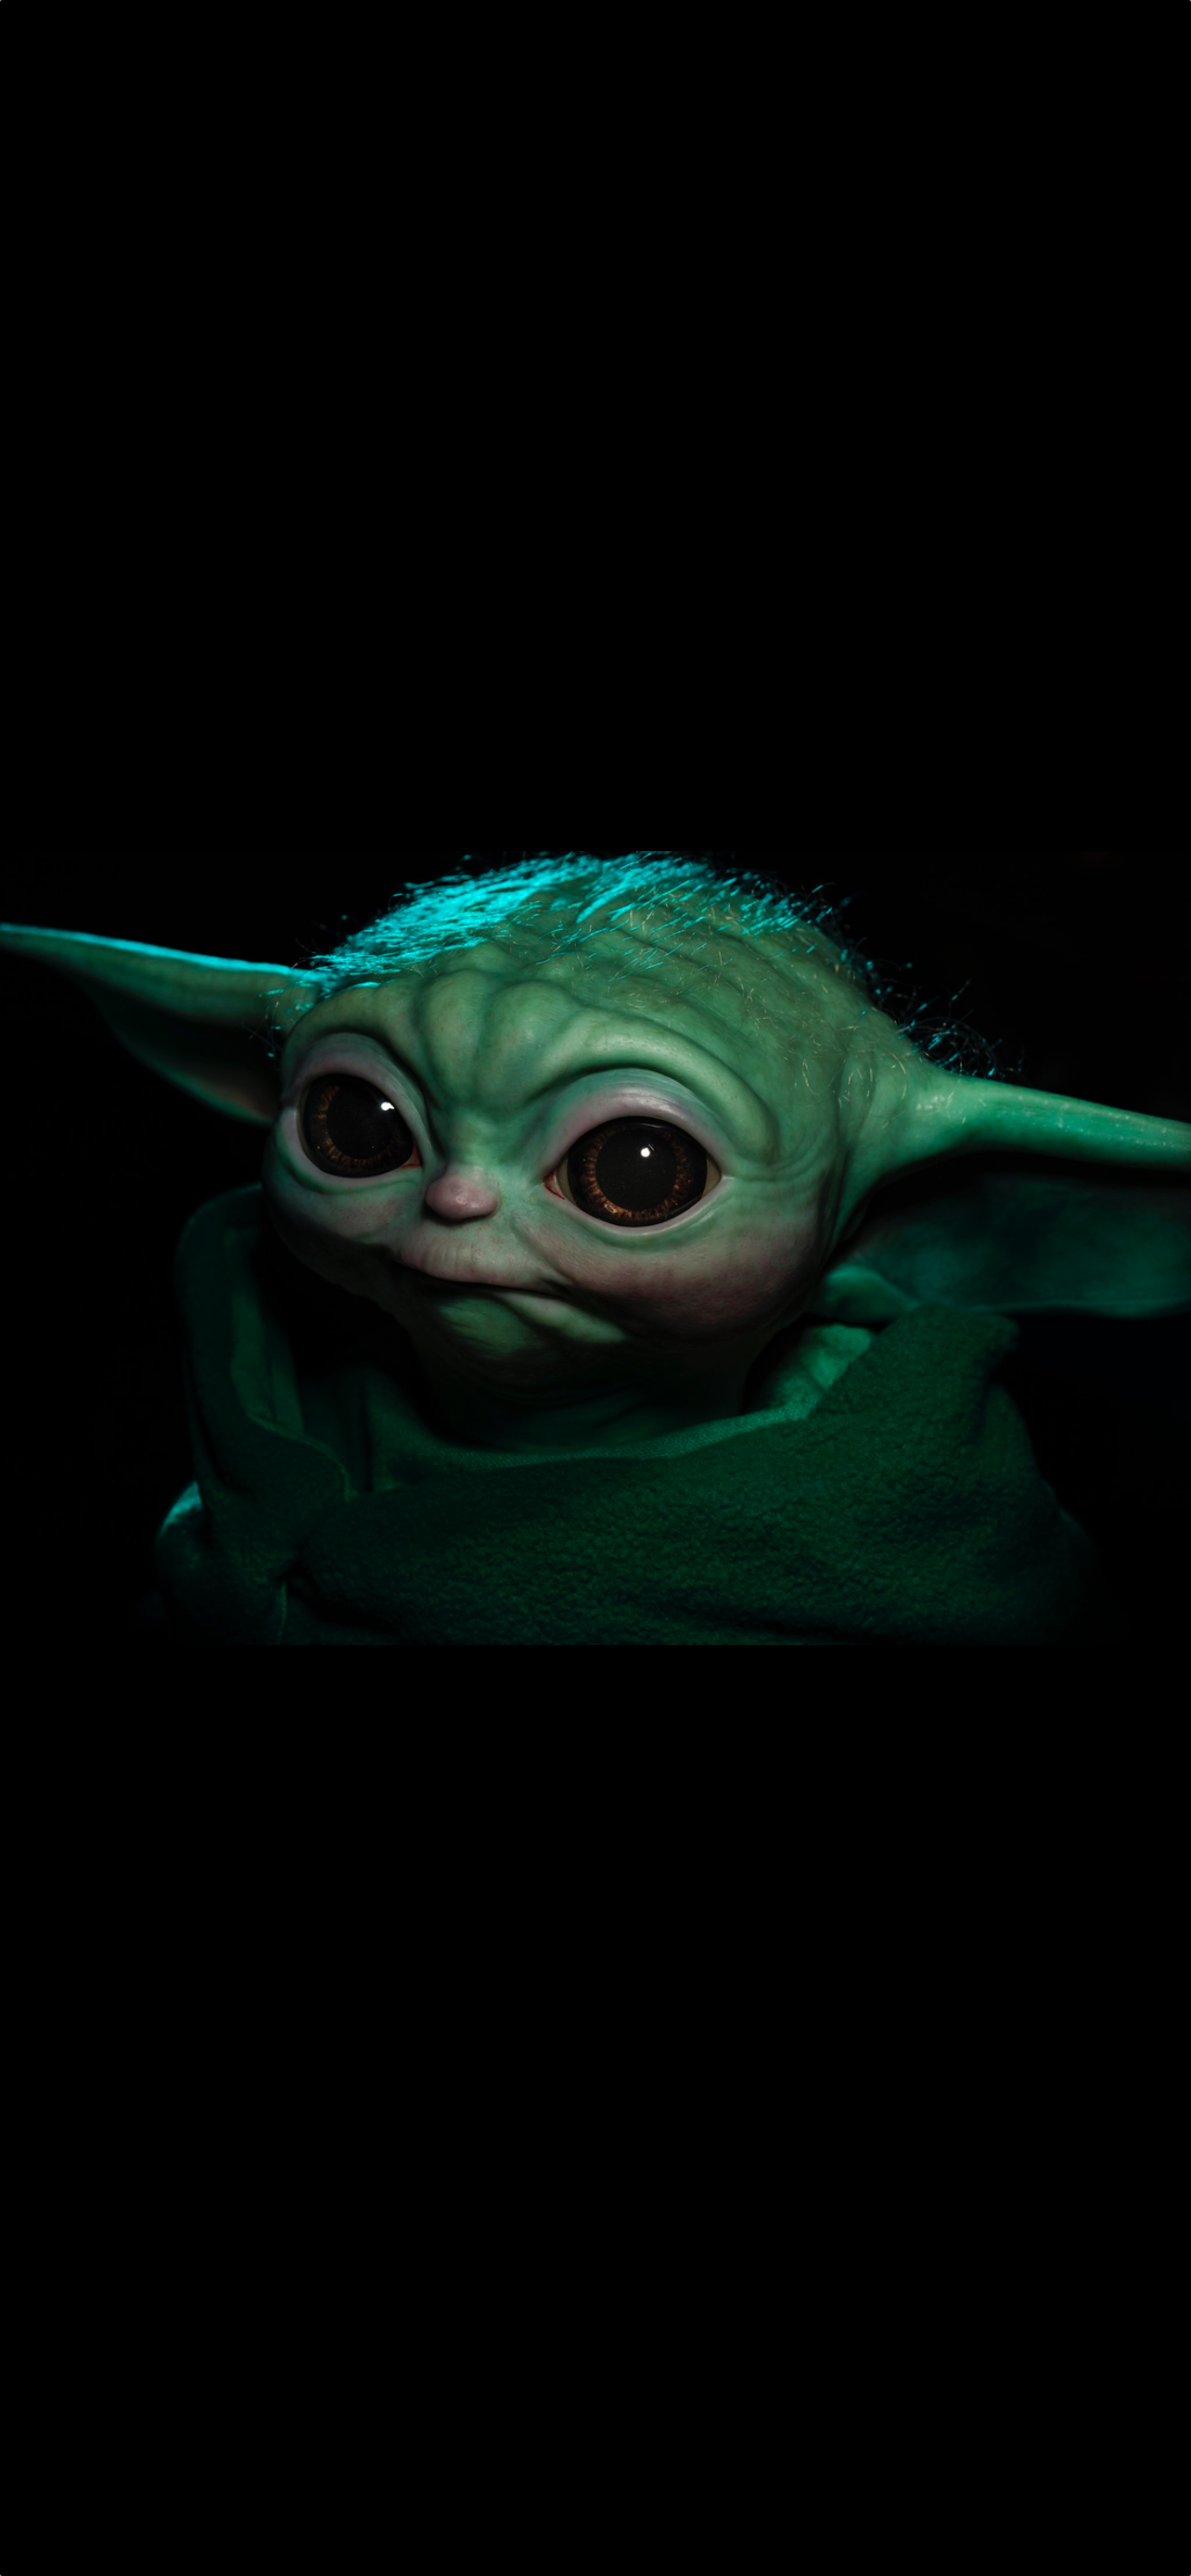 3 beautiful wallpapers of Grogu (the Child also known as Baby Yoda)